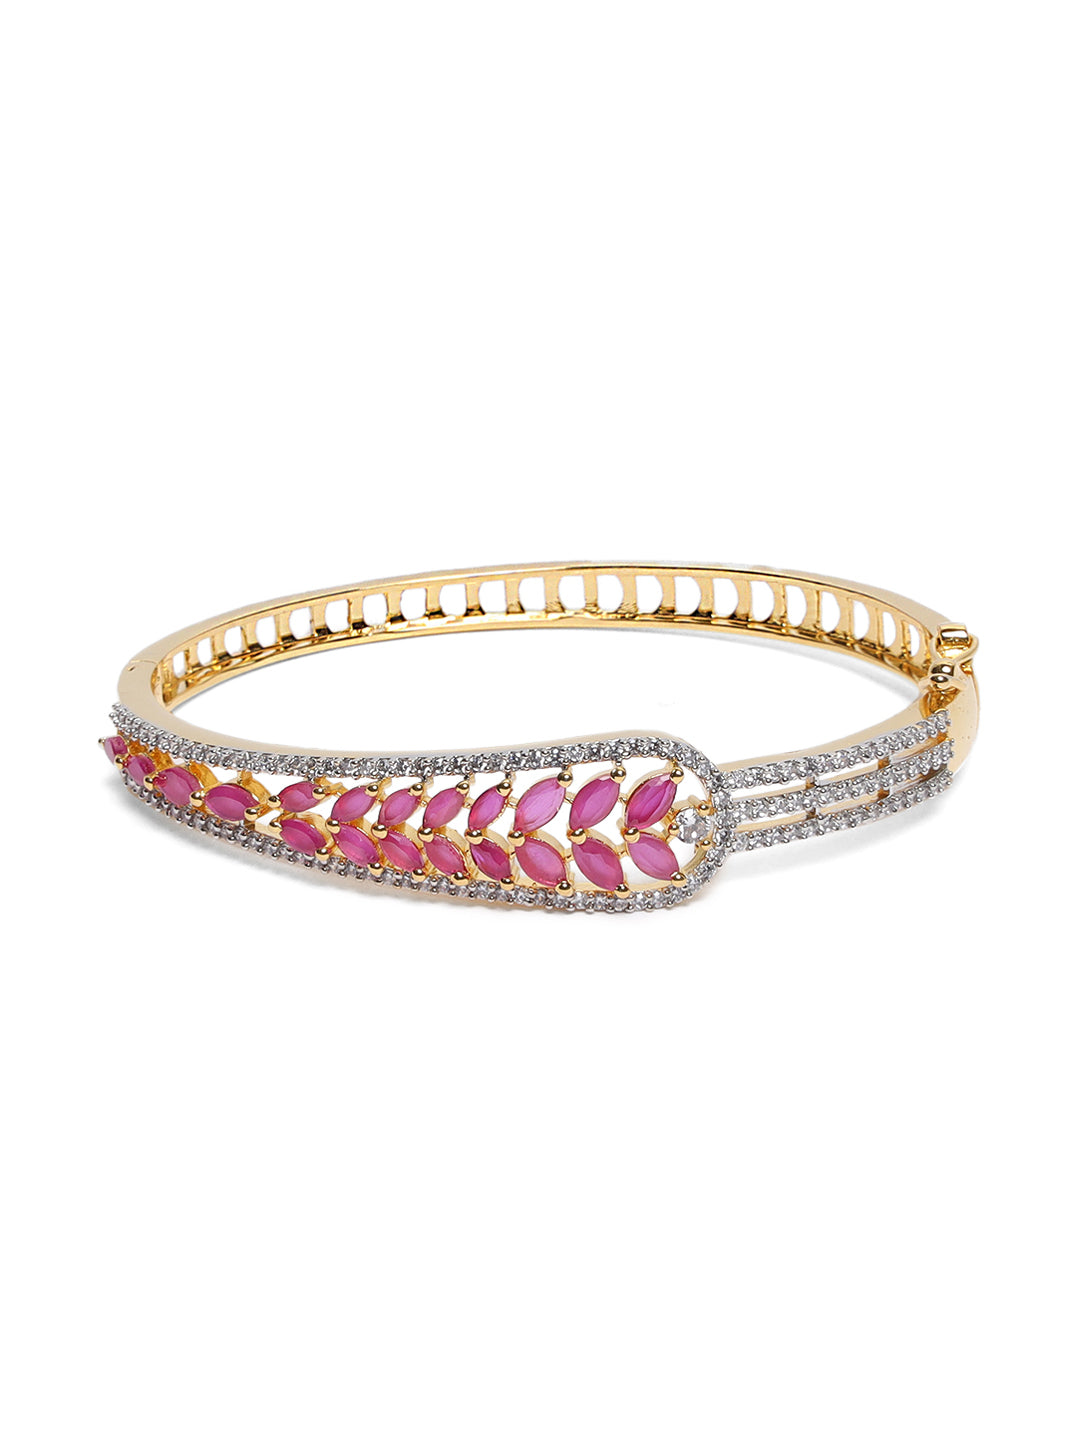 Gold-Plated American Diamond and Ruby Studded Leaf Patterned Bracelet